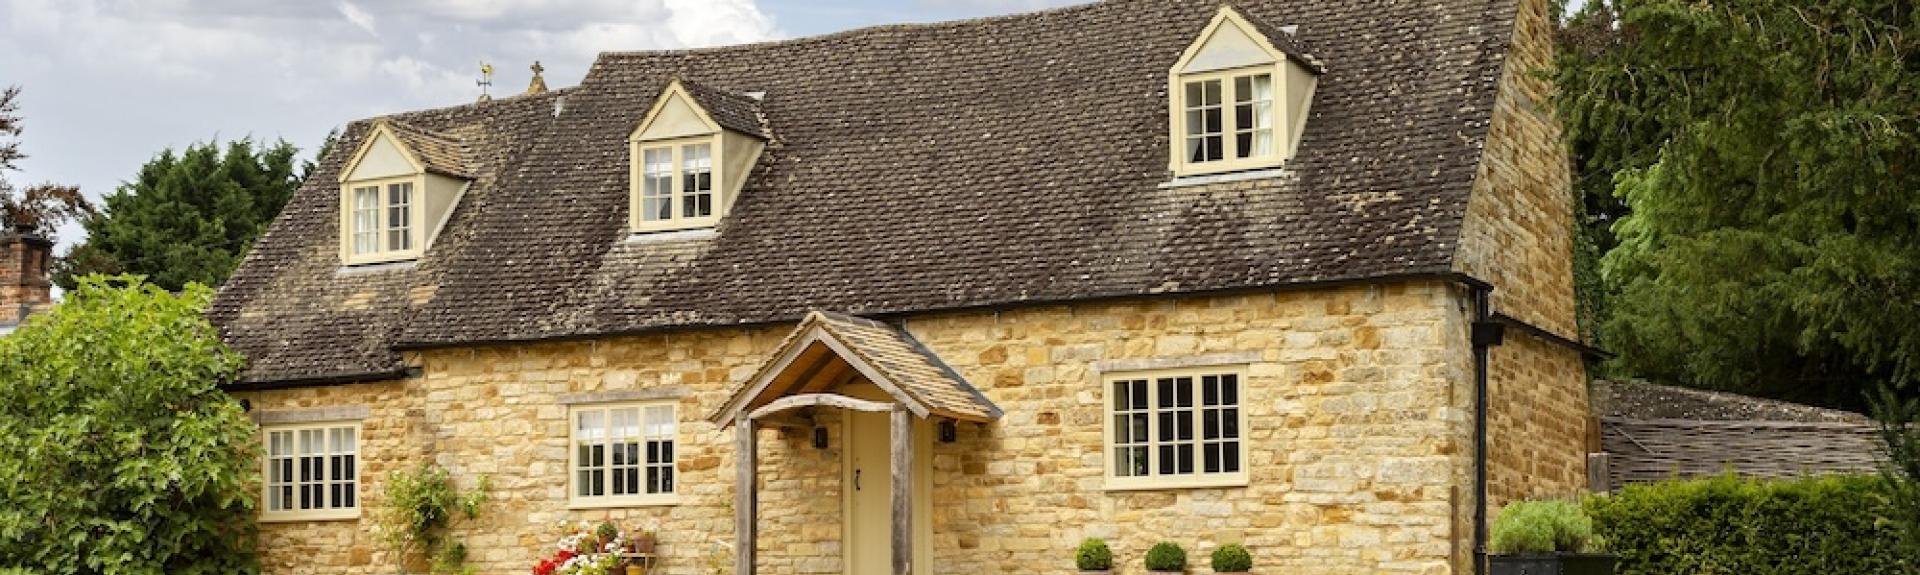 A 2-storey Cotswold honeystone cottage overlooking a spacious lawn.